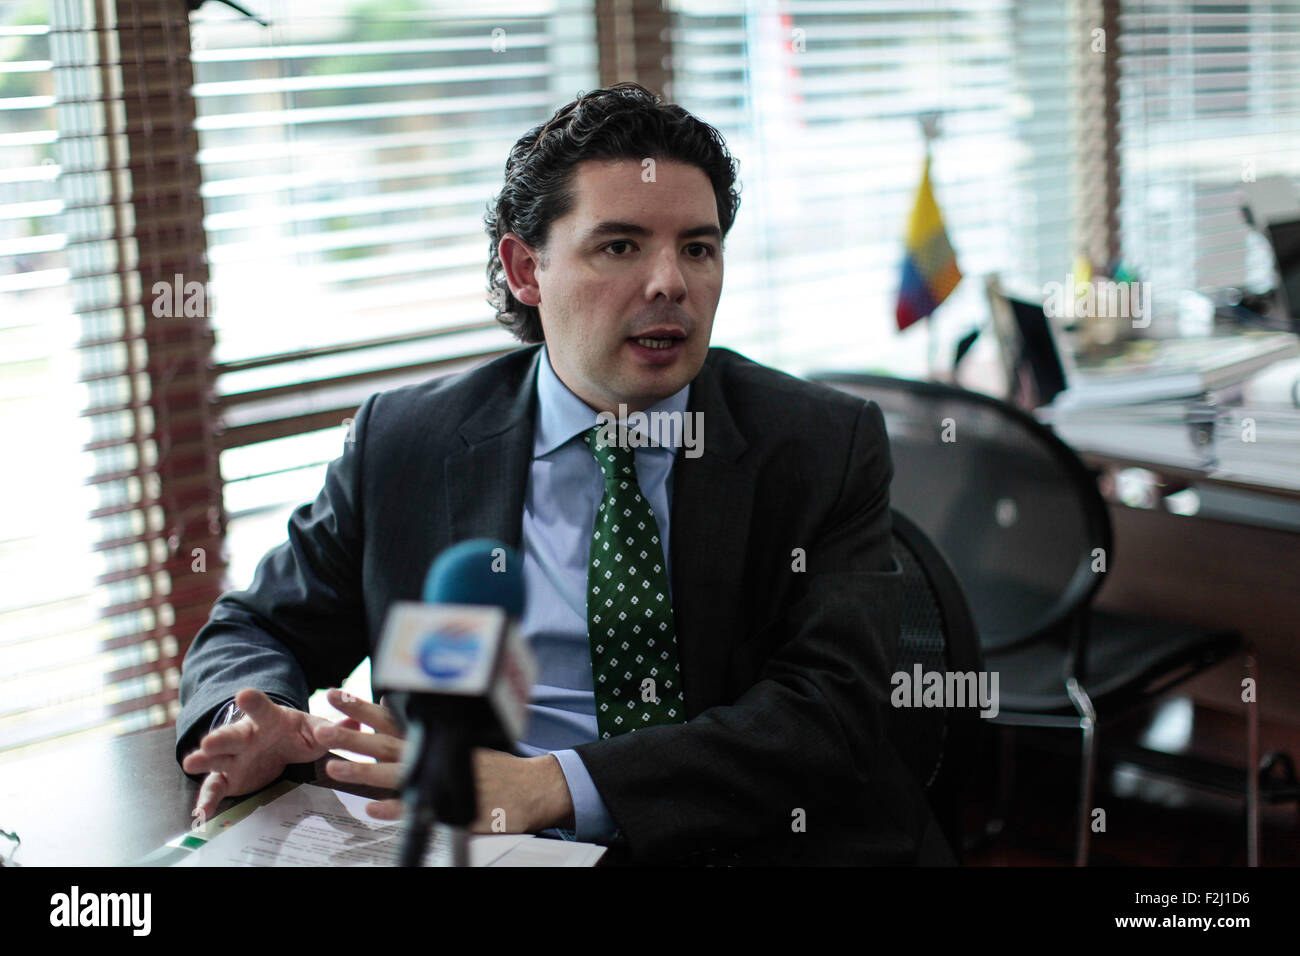 (150920) -- BOGOTA, Sept. 20, 2015 (Xinhua) -- Photo taken on Sept. 17, 2015 shows Colombian deputy Defense Minister for International Politics and Affairs Anibal Fernandez de Soto receiving an interview with Xinhua News Agency in Bogota city, capital of Colombia. Colombian Government began to take measures against the increase in several regions of the country of illegal mining, that is developed specially by the guerrillas and criminal bands that exploit the mineral resources of the country irregularly and are leaving severe damages to the environment. Anibal Fernandez de Soto explained that Stock Photo